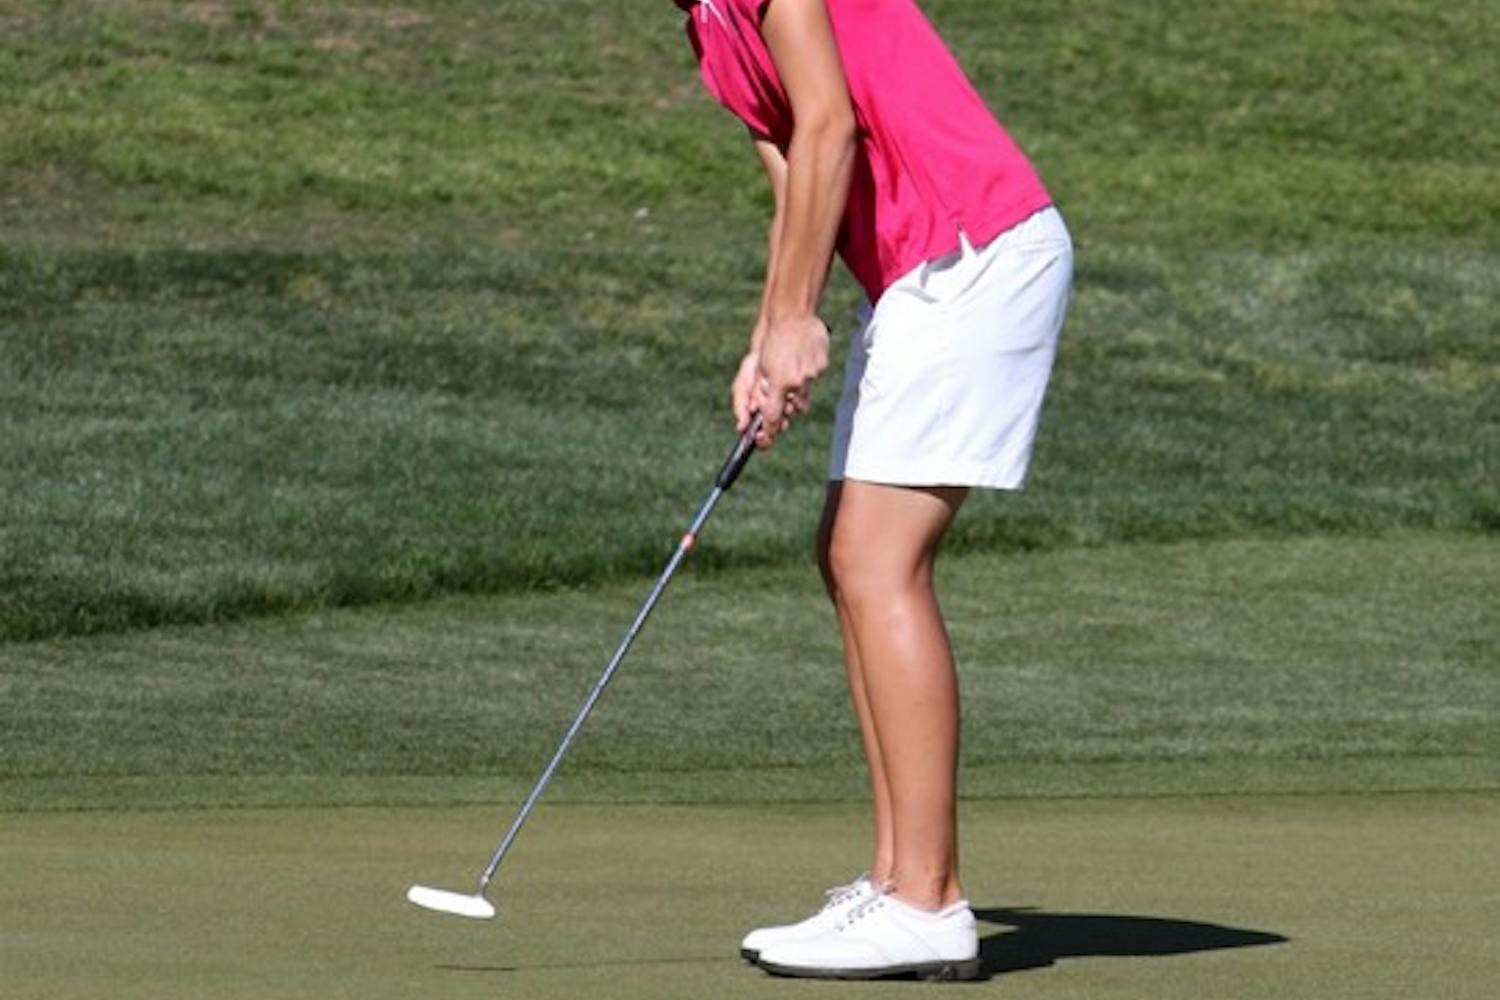 TURNING PRO: Ex-ASU golfer Carlota Ciganda sinks a putt during the PING/ASU Invitational earlier in the year. Ciganda is still adjusting to life away from the team after leaving a year early to start her professional career. (Photo by Beth Easterbrook)